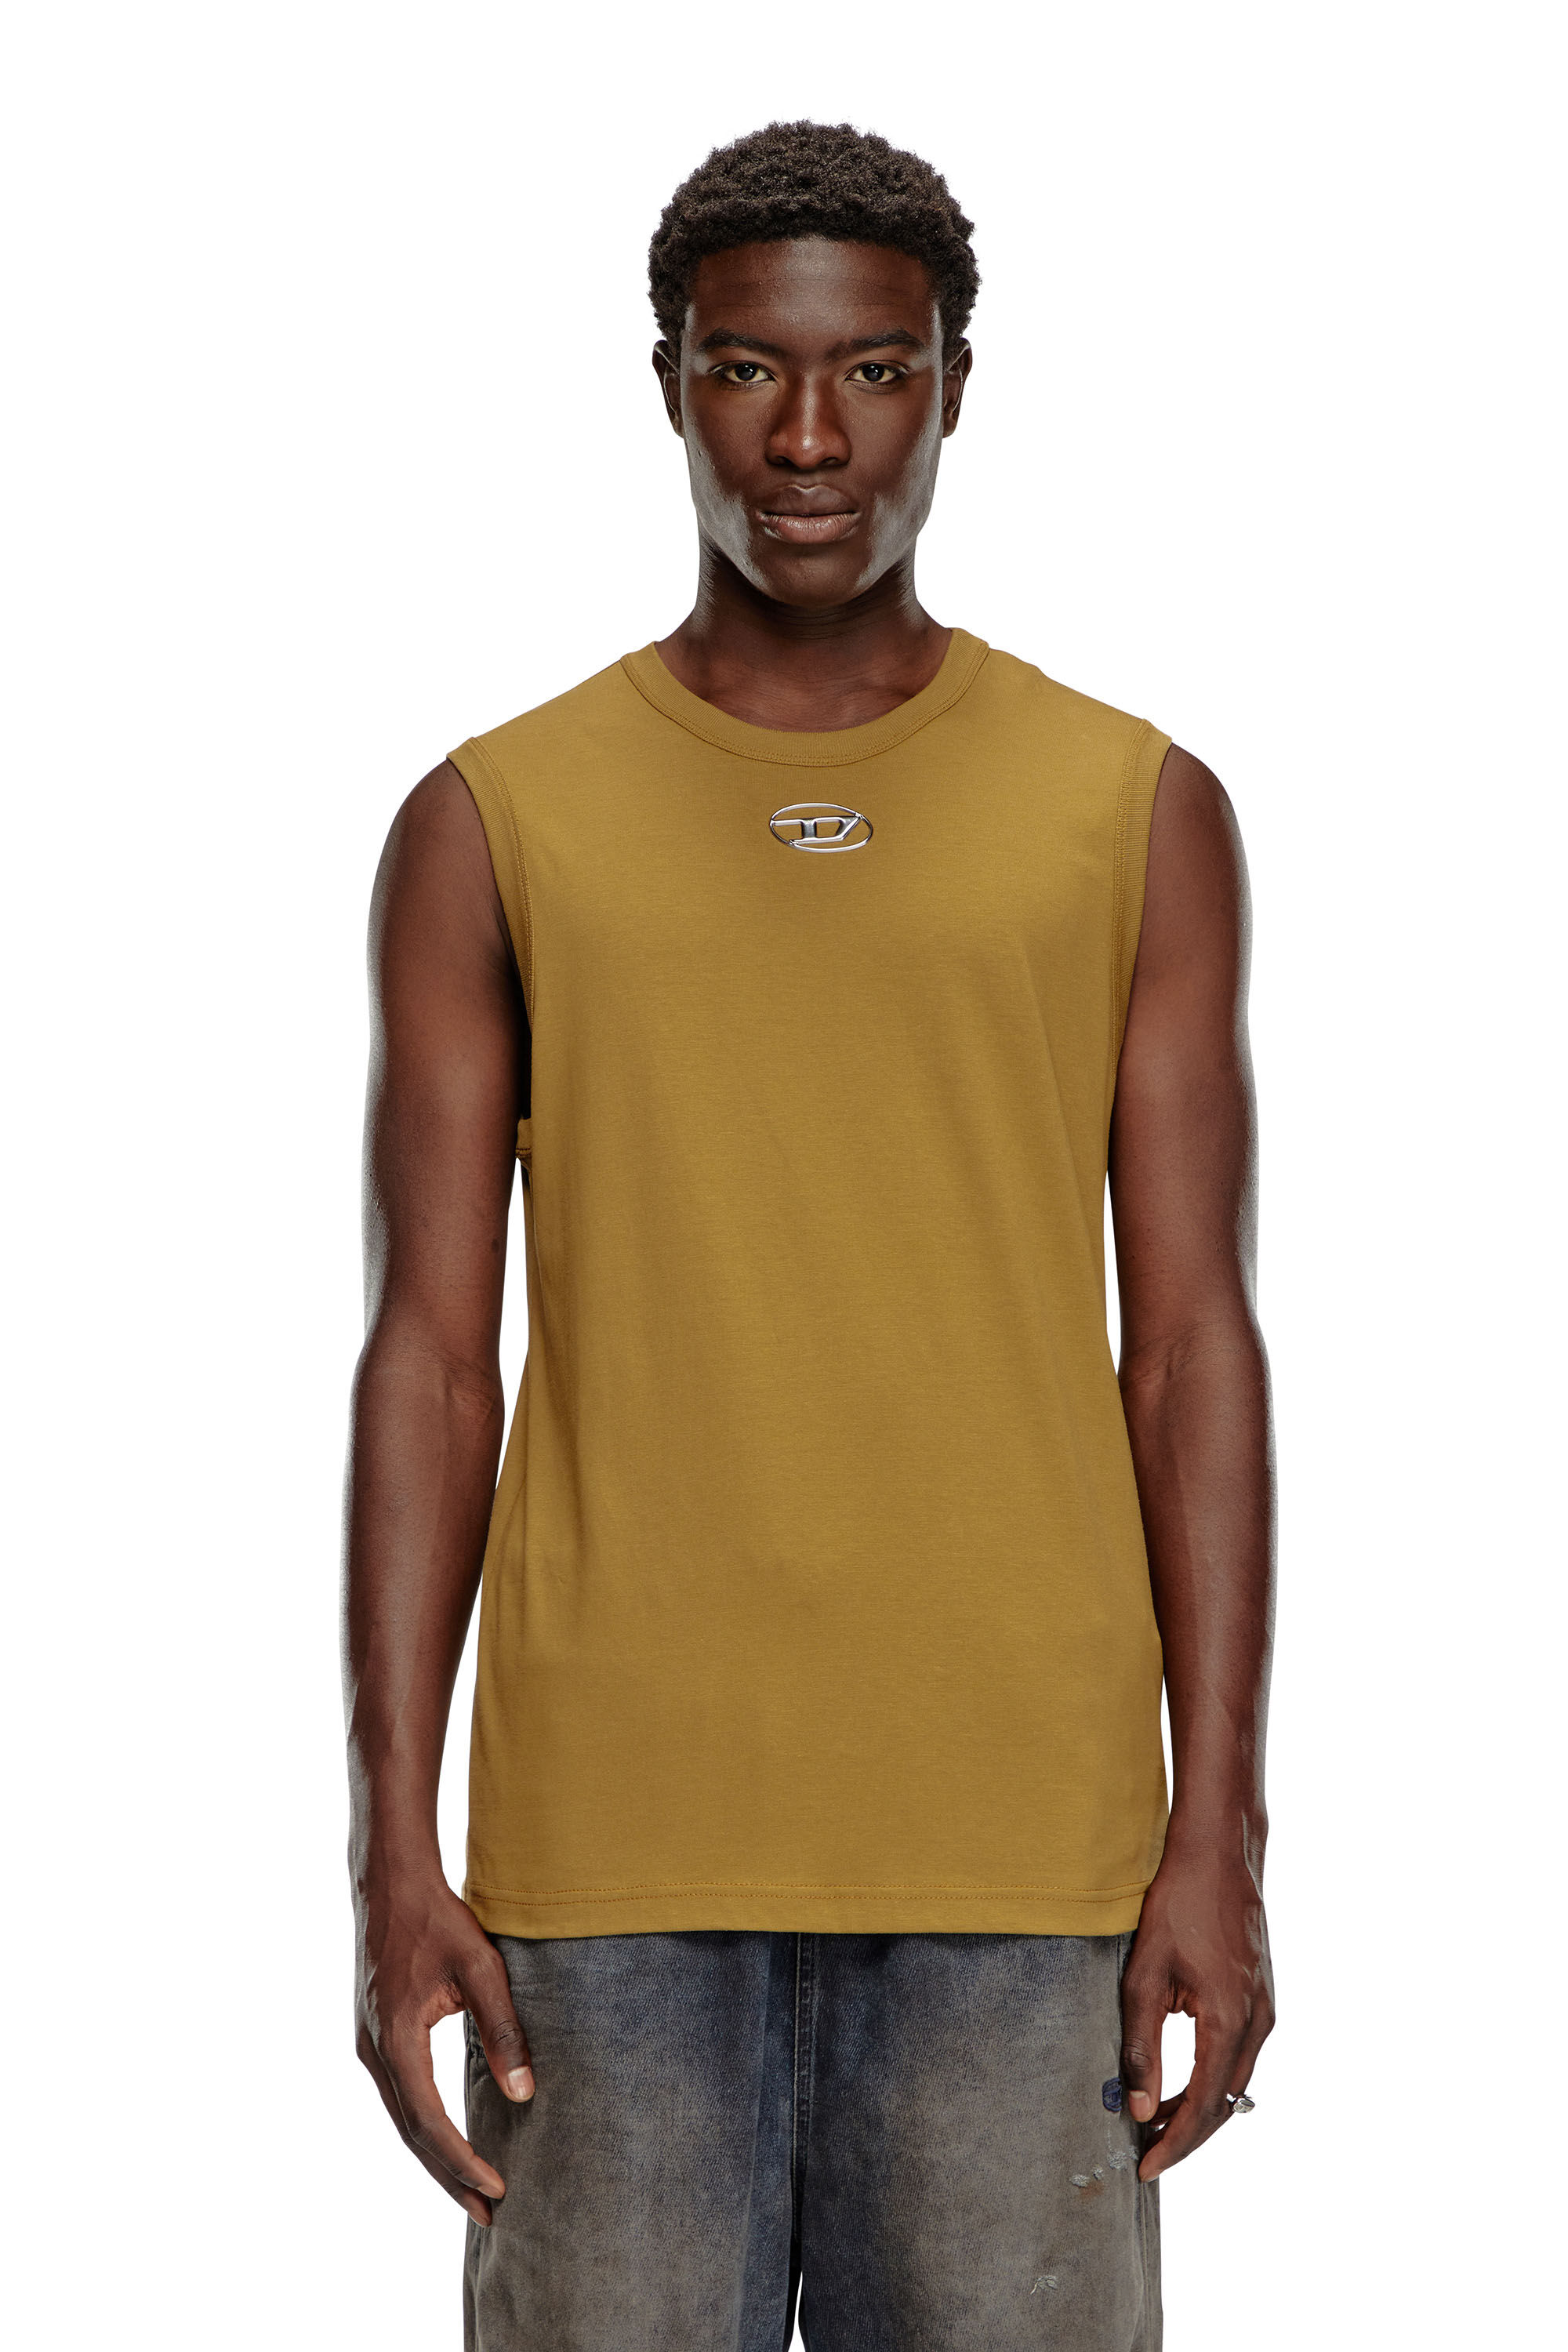 Diesel - T-BISCO-OD, Man Tank top with injection-moulded Oval D in ToBeDefined - Image 3